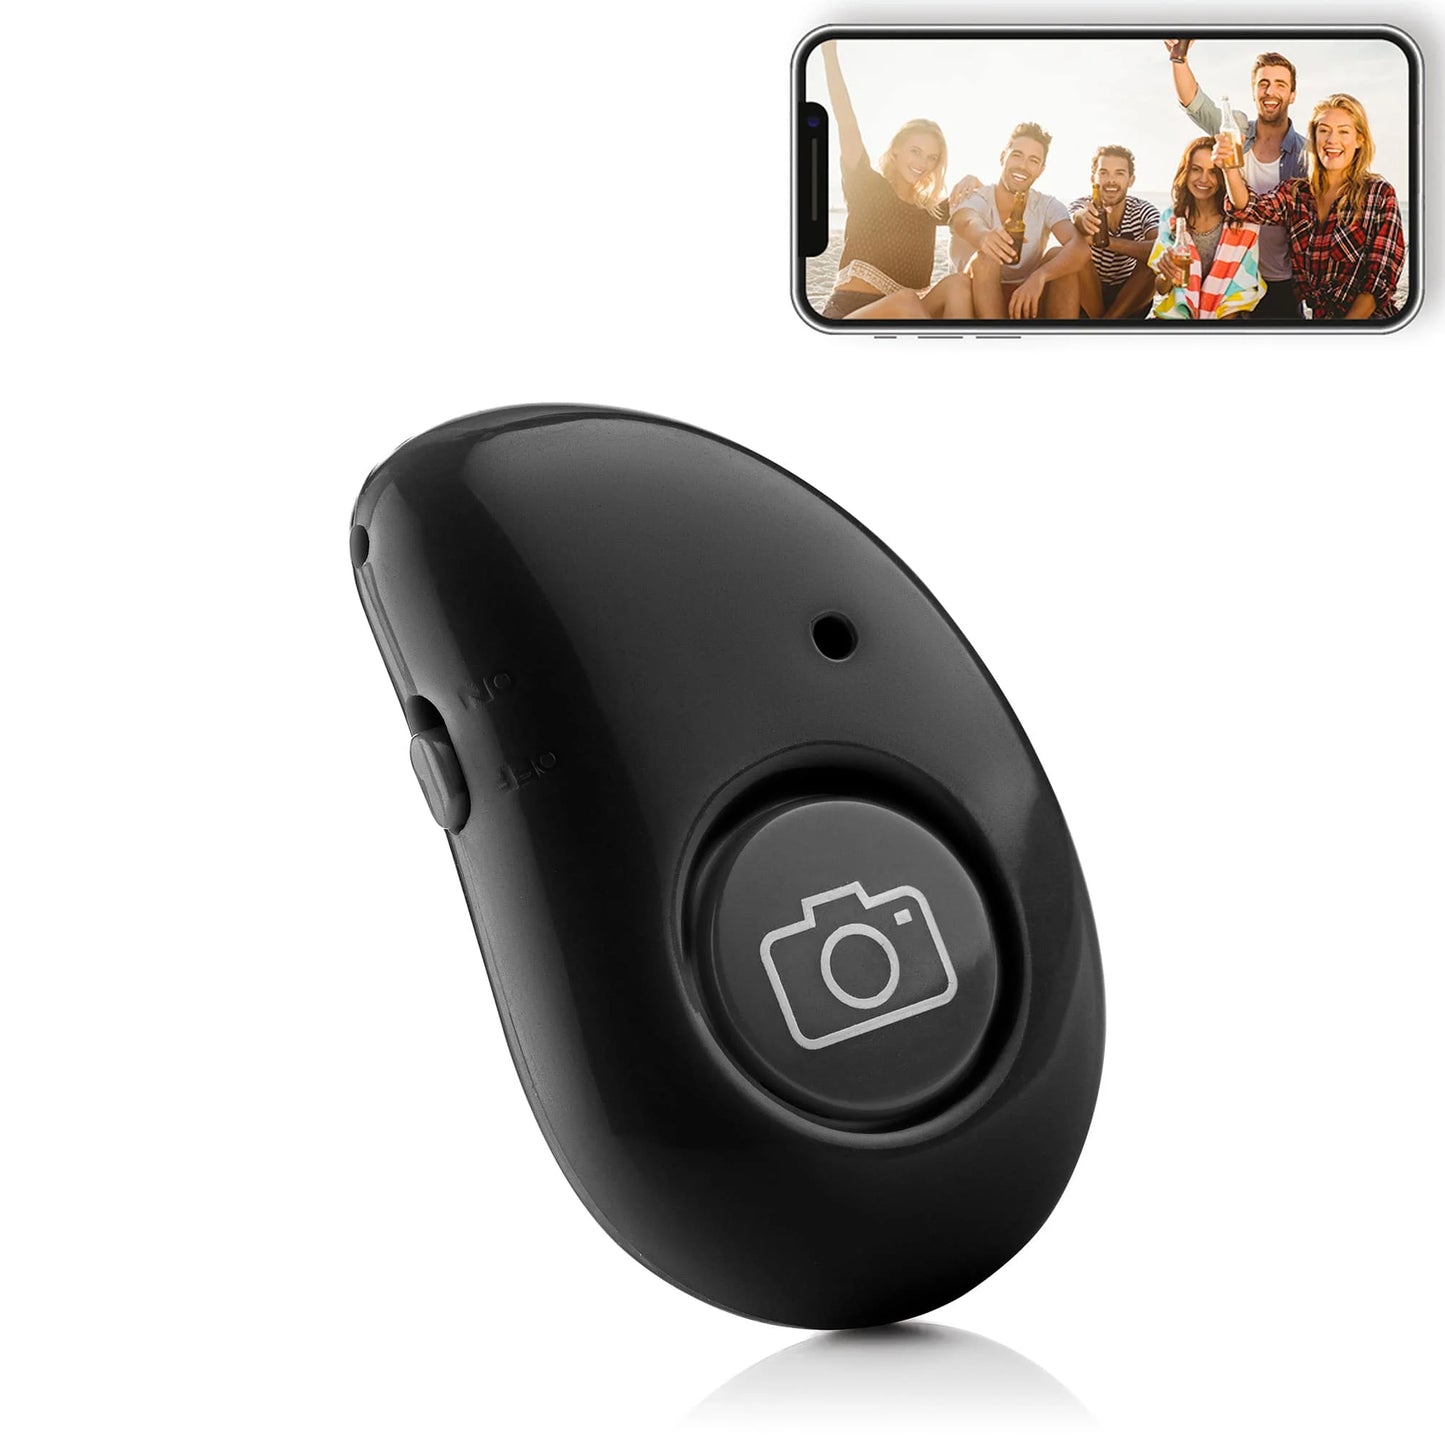 Bluetooth remote shutter for smartphone camera – various colours